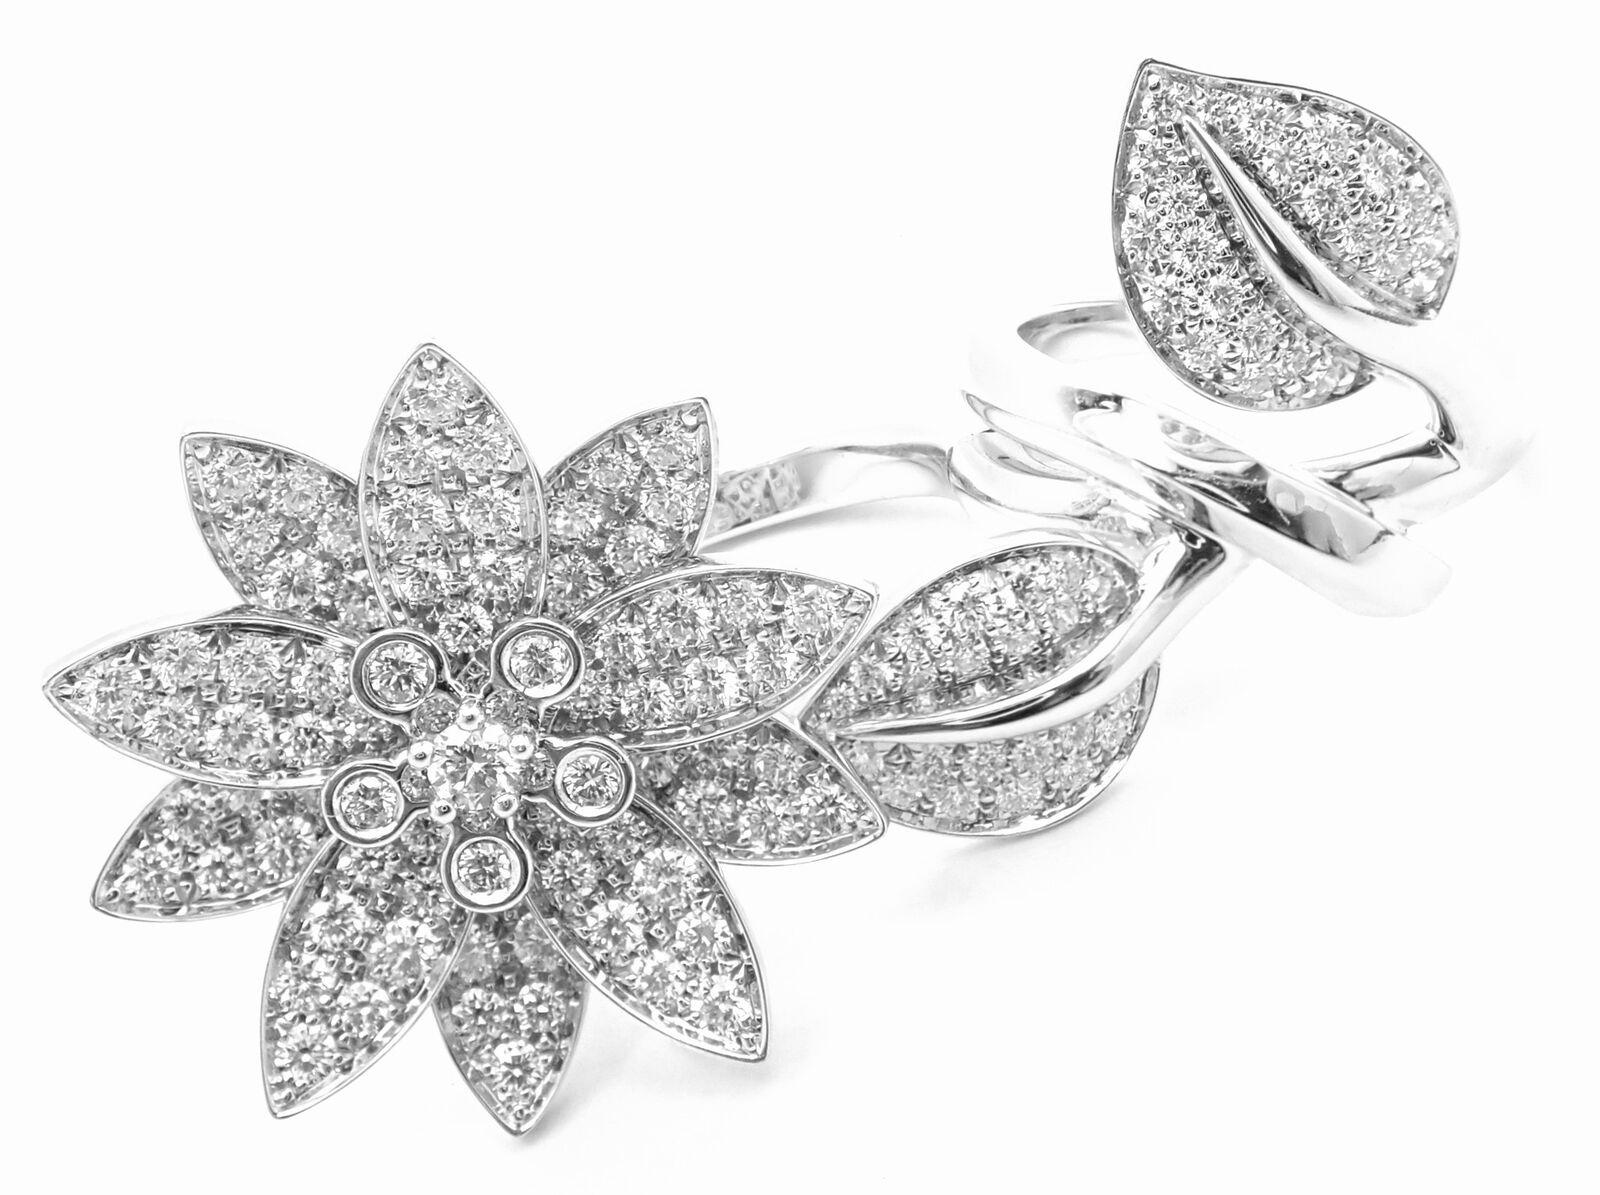 18k White Gold Lotus Flower Diamond Between The Finger Ring by Van Cleef & Arpels.  
With 127 round brilliant cut diamonds VVS1 clarity, E color
total weight approx. 2.13ct 
This ring comes with certificate of authenticity from Van Cleef & Arpels